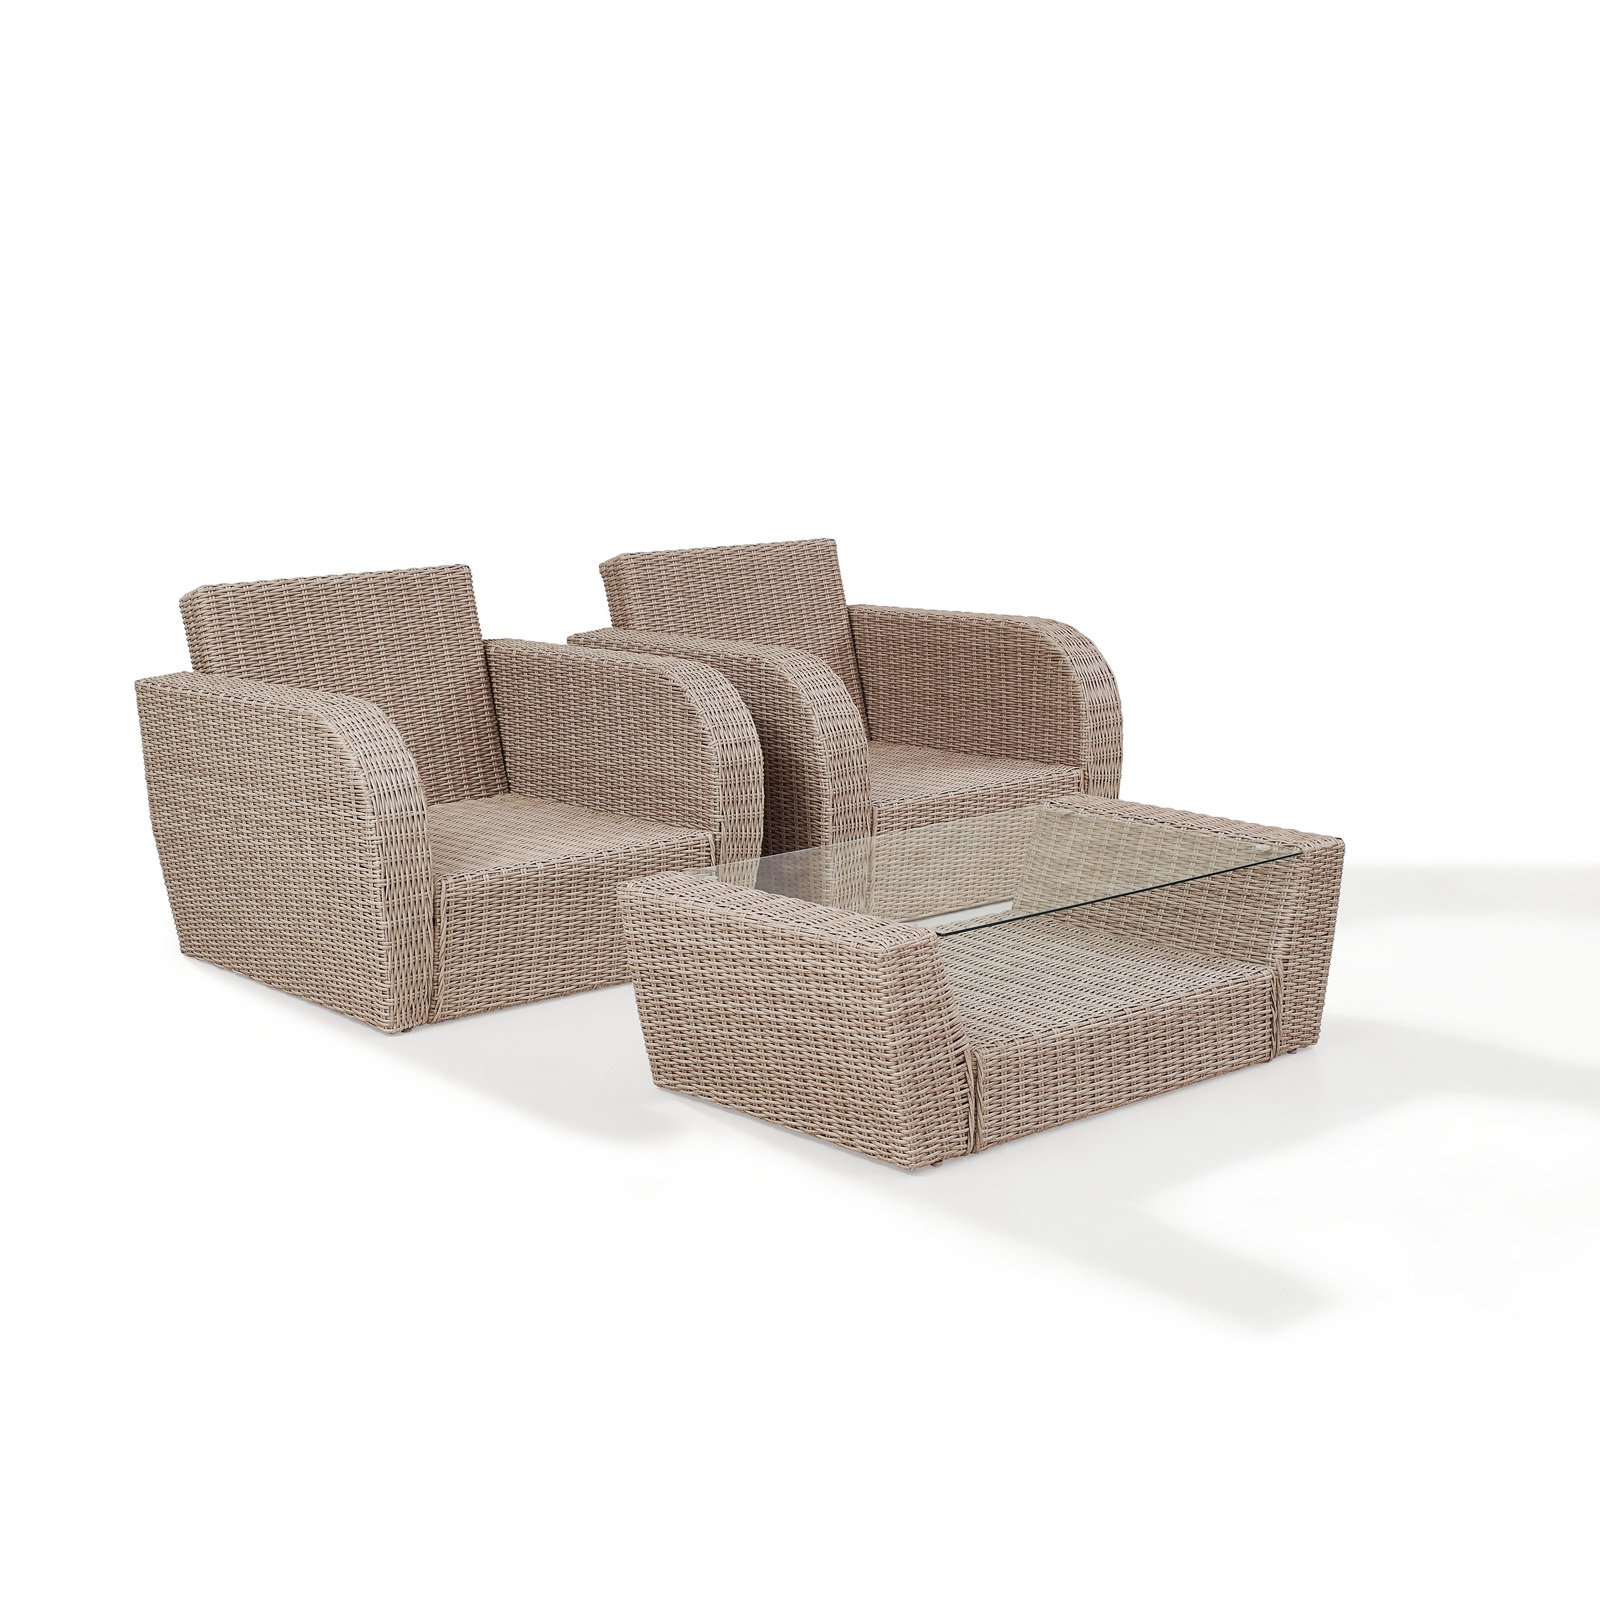 Crosley Furniture St Augustine 3 Pc Outdoor Wicker Seating Set With Mist Cushion - Two Outdoor Wicker Chairs, Coffee Table - image 5 of 11